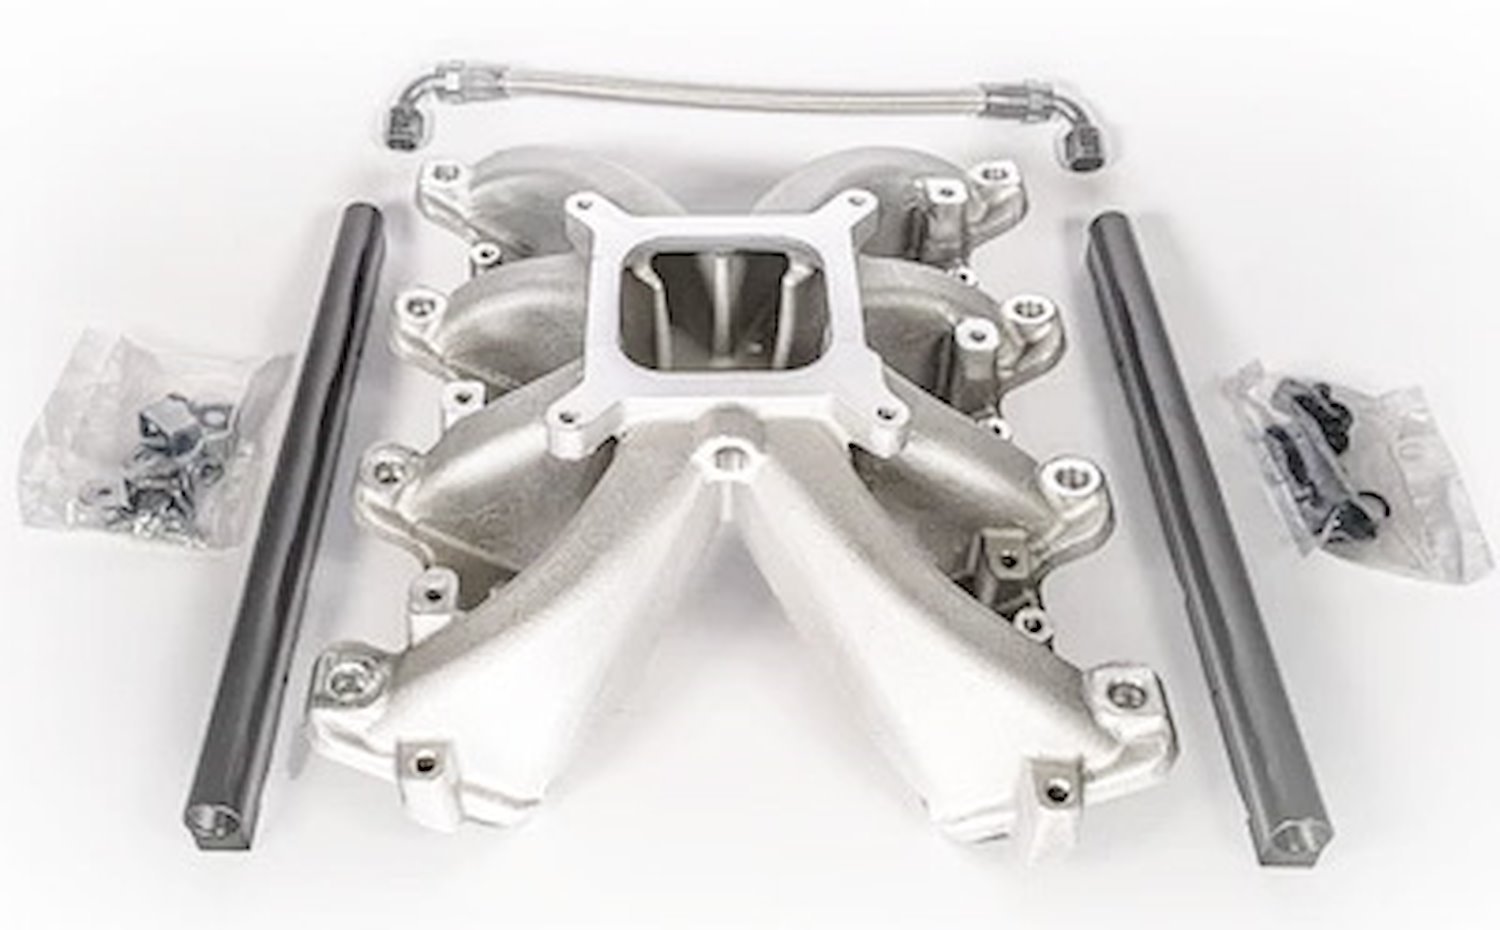 AM2016 Mid-Rise EFI Intake Manifold, for GM LS1/LS2/LS6 Engine, with Fuel Rail Kit, Aluminum